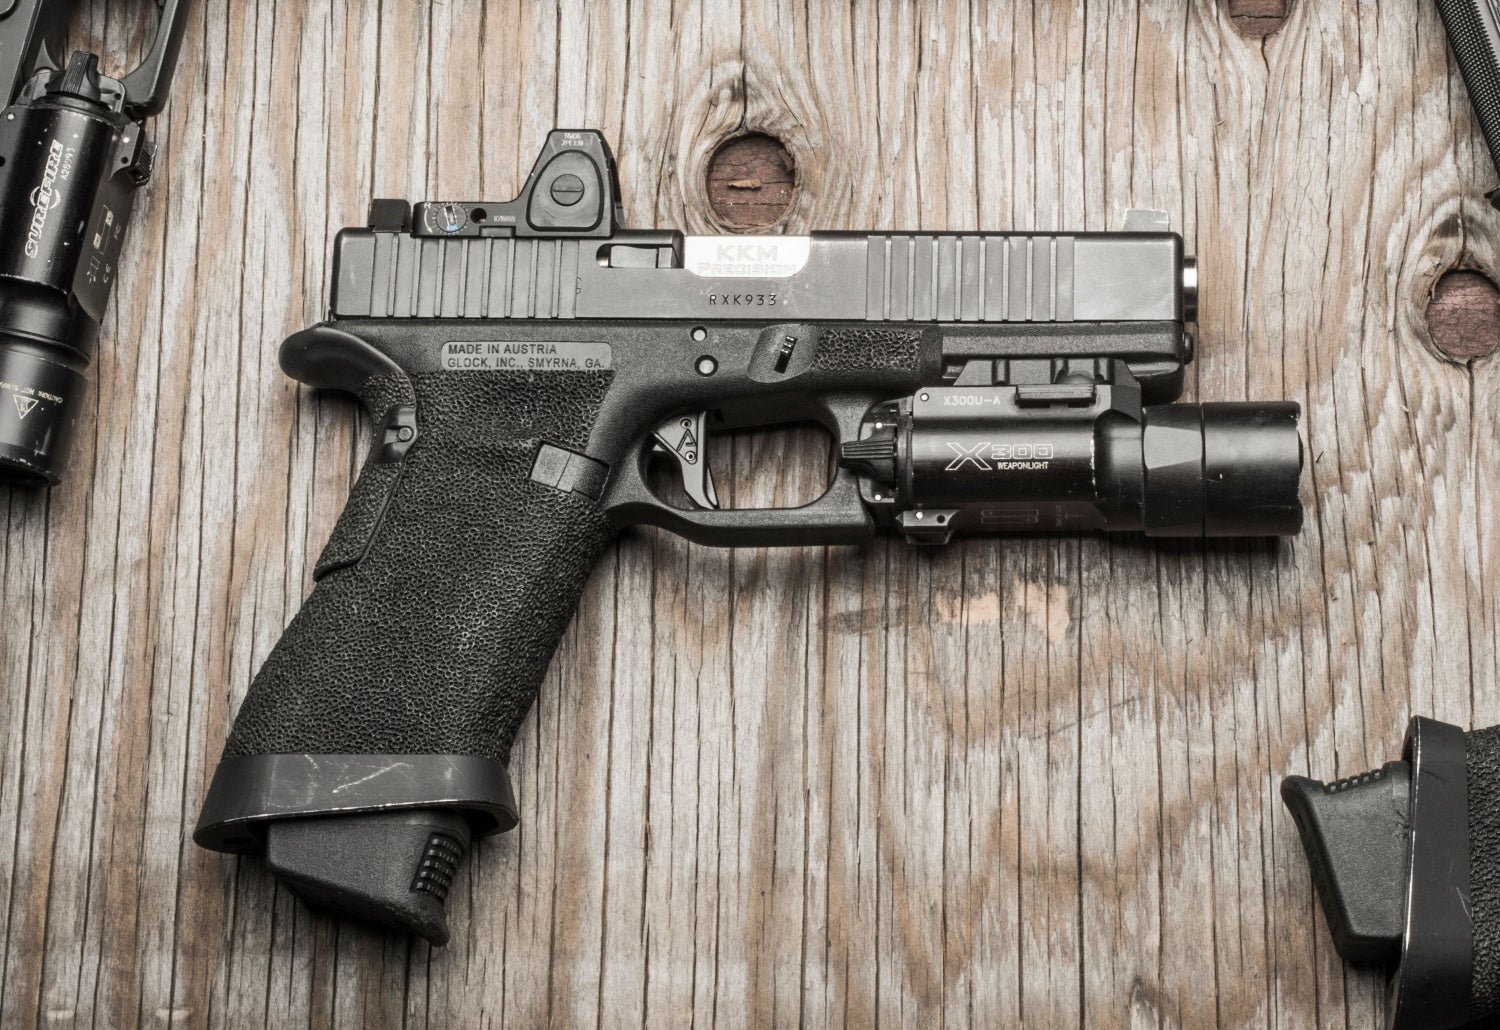 Introducing the Dual Defense Kit for RMR from Trijicon